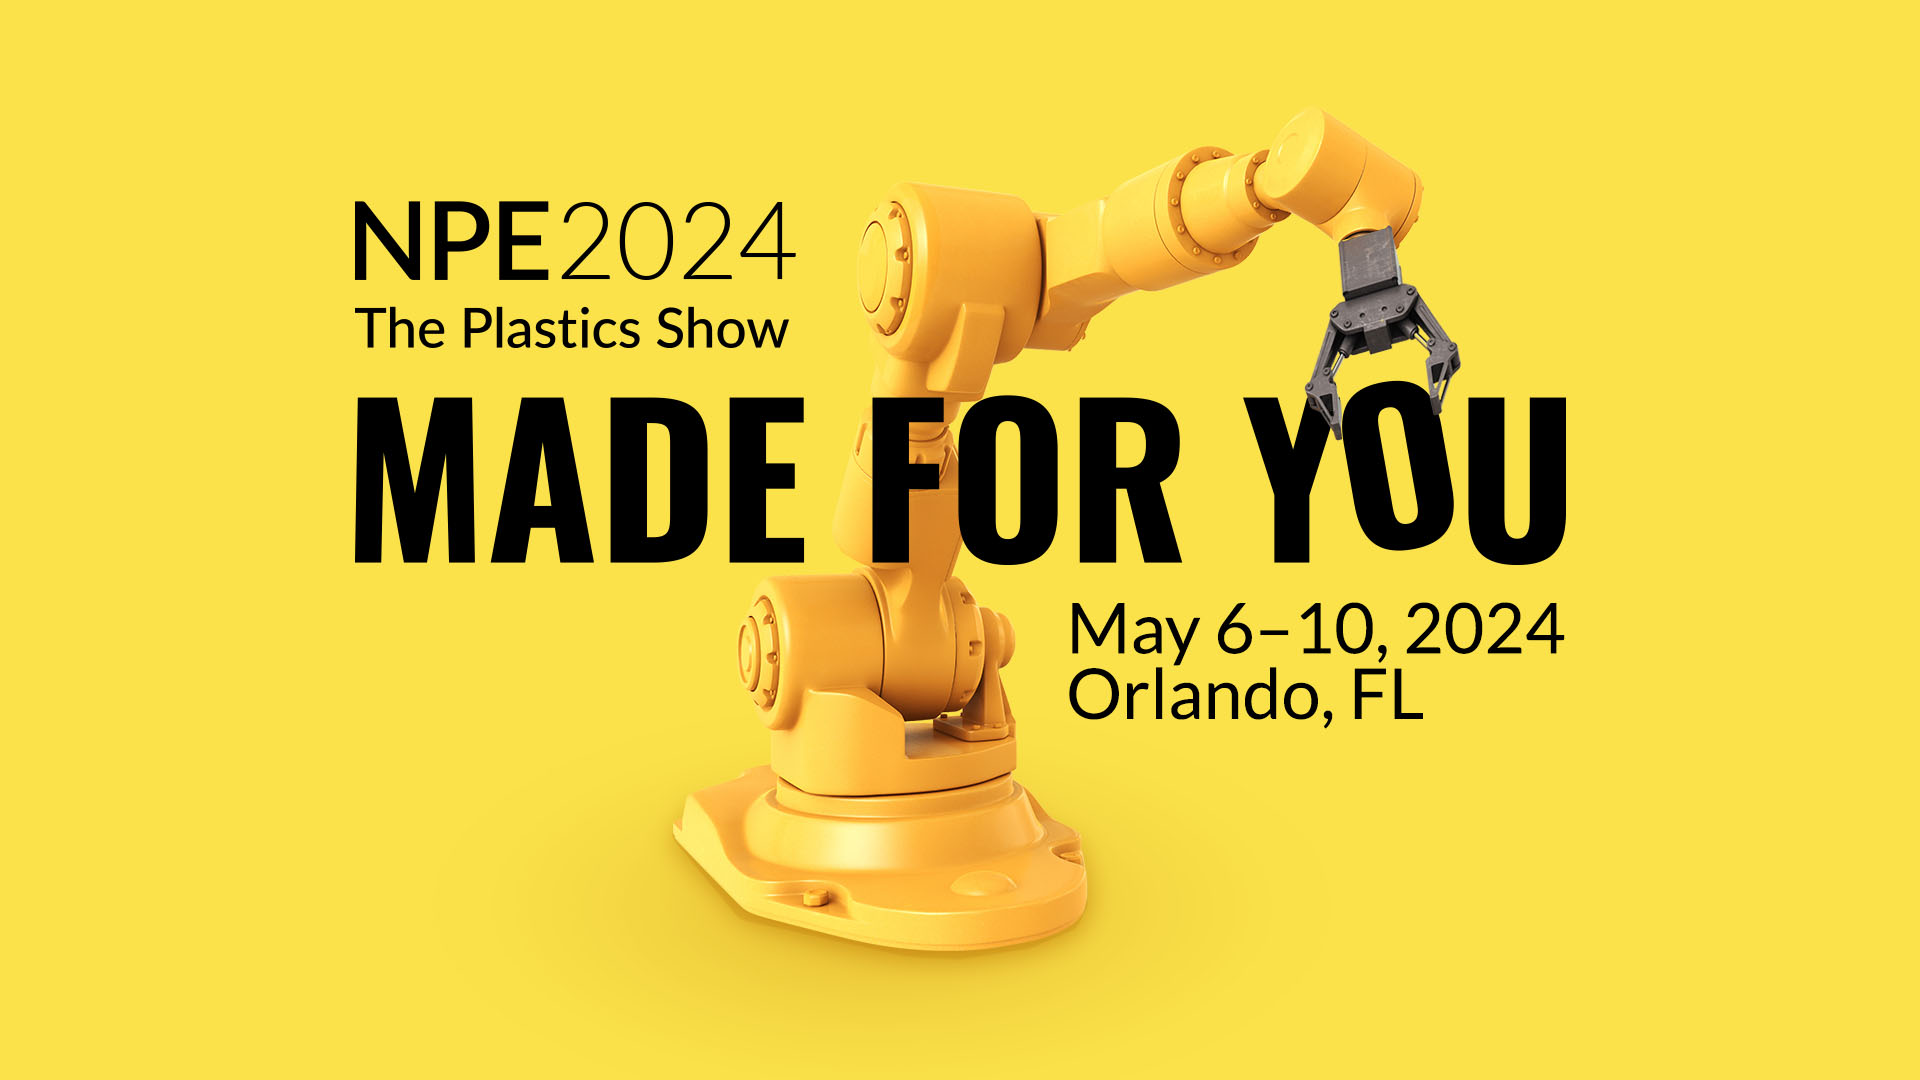 NPE, the Most Influential Plastics Industry Show in the Americas